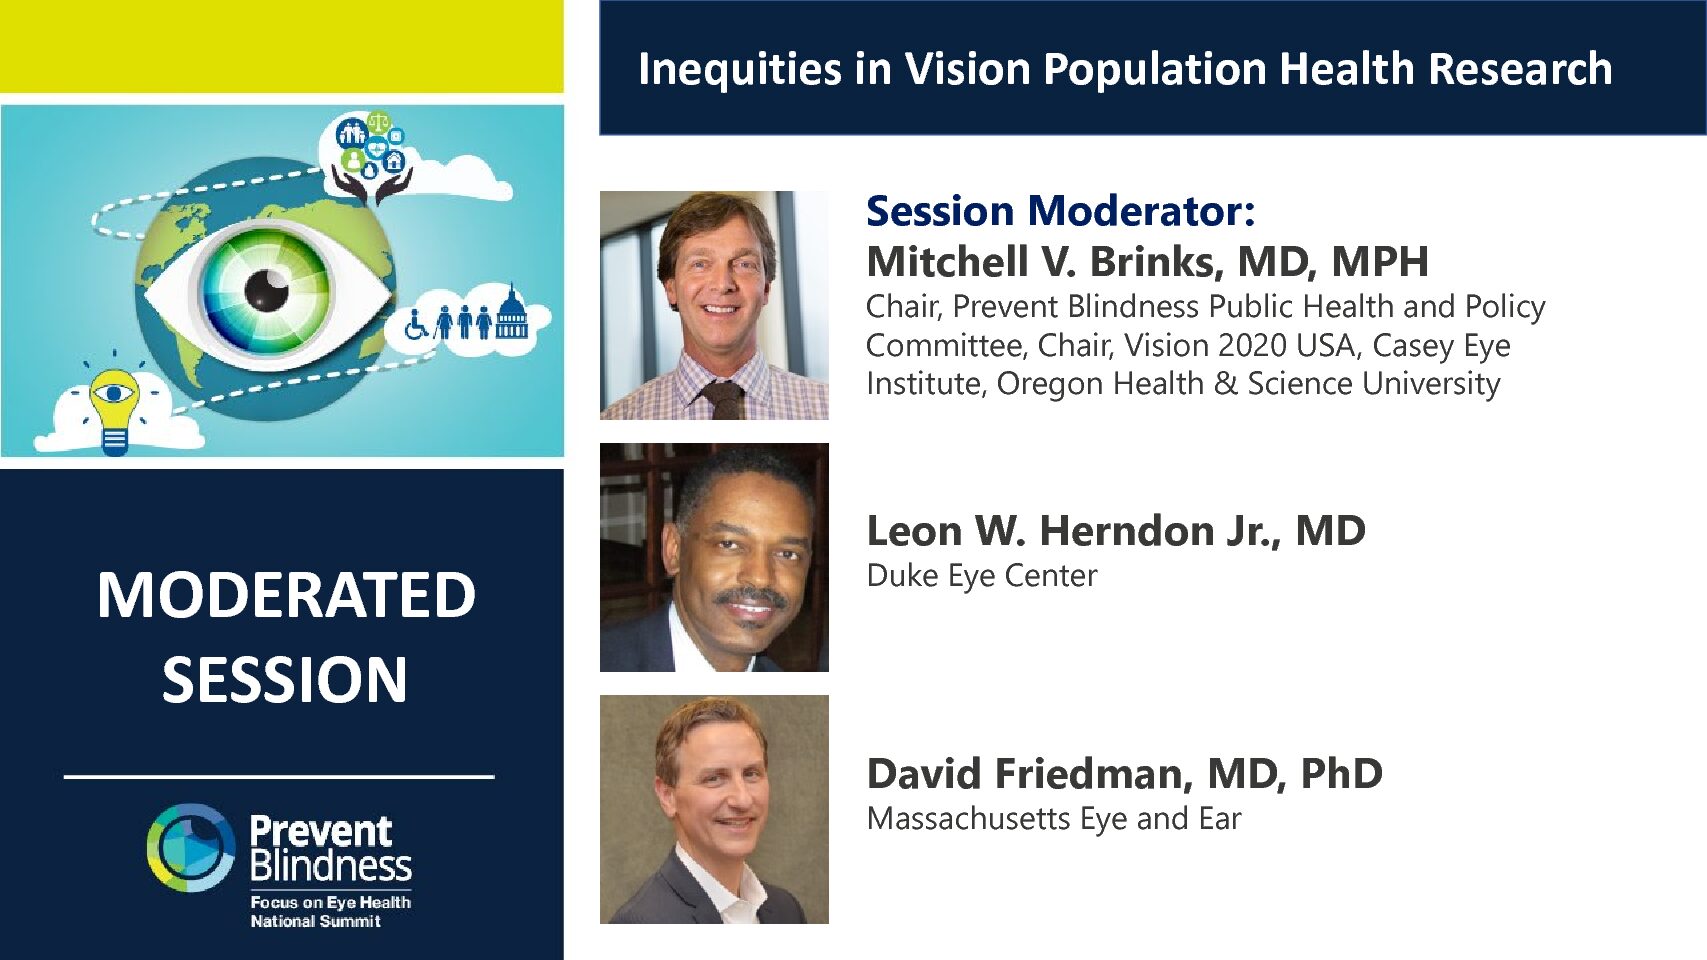 Inequities in Vision Population Health Research